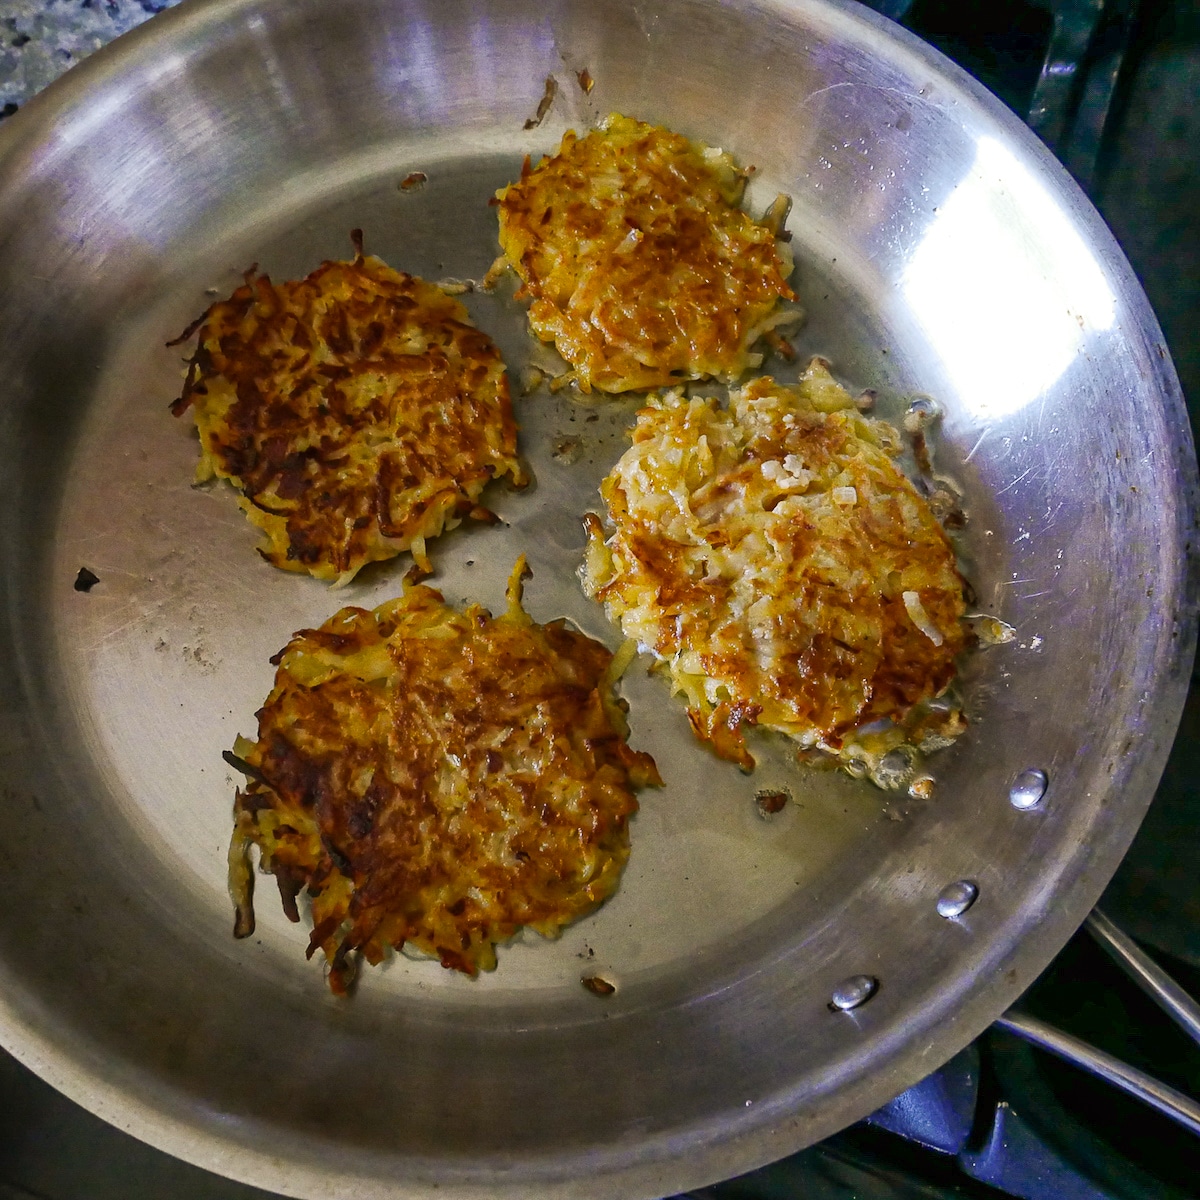 Golden and crispy fritters after being flipped in a frying pan.